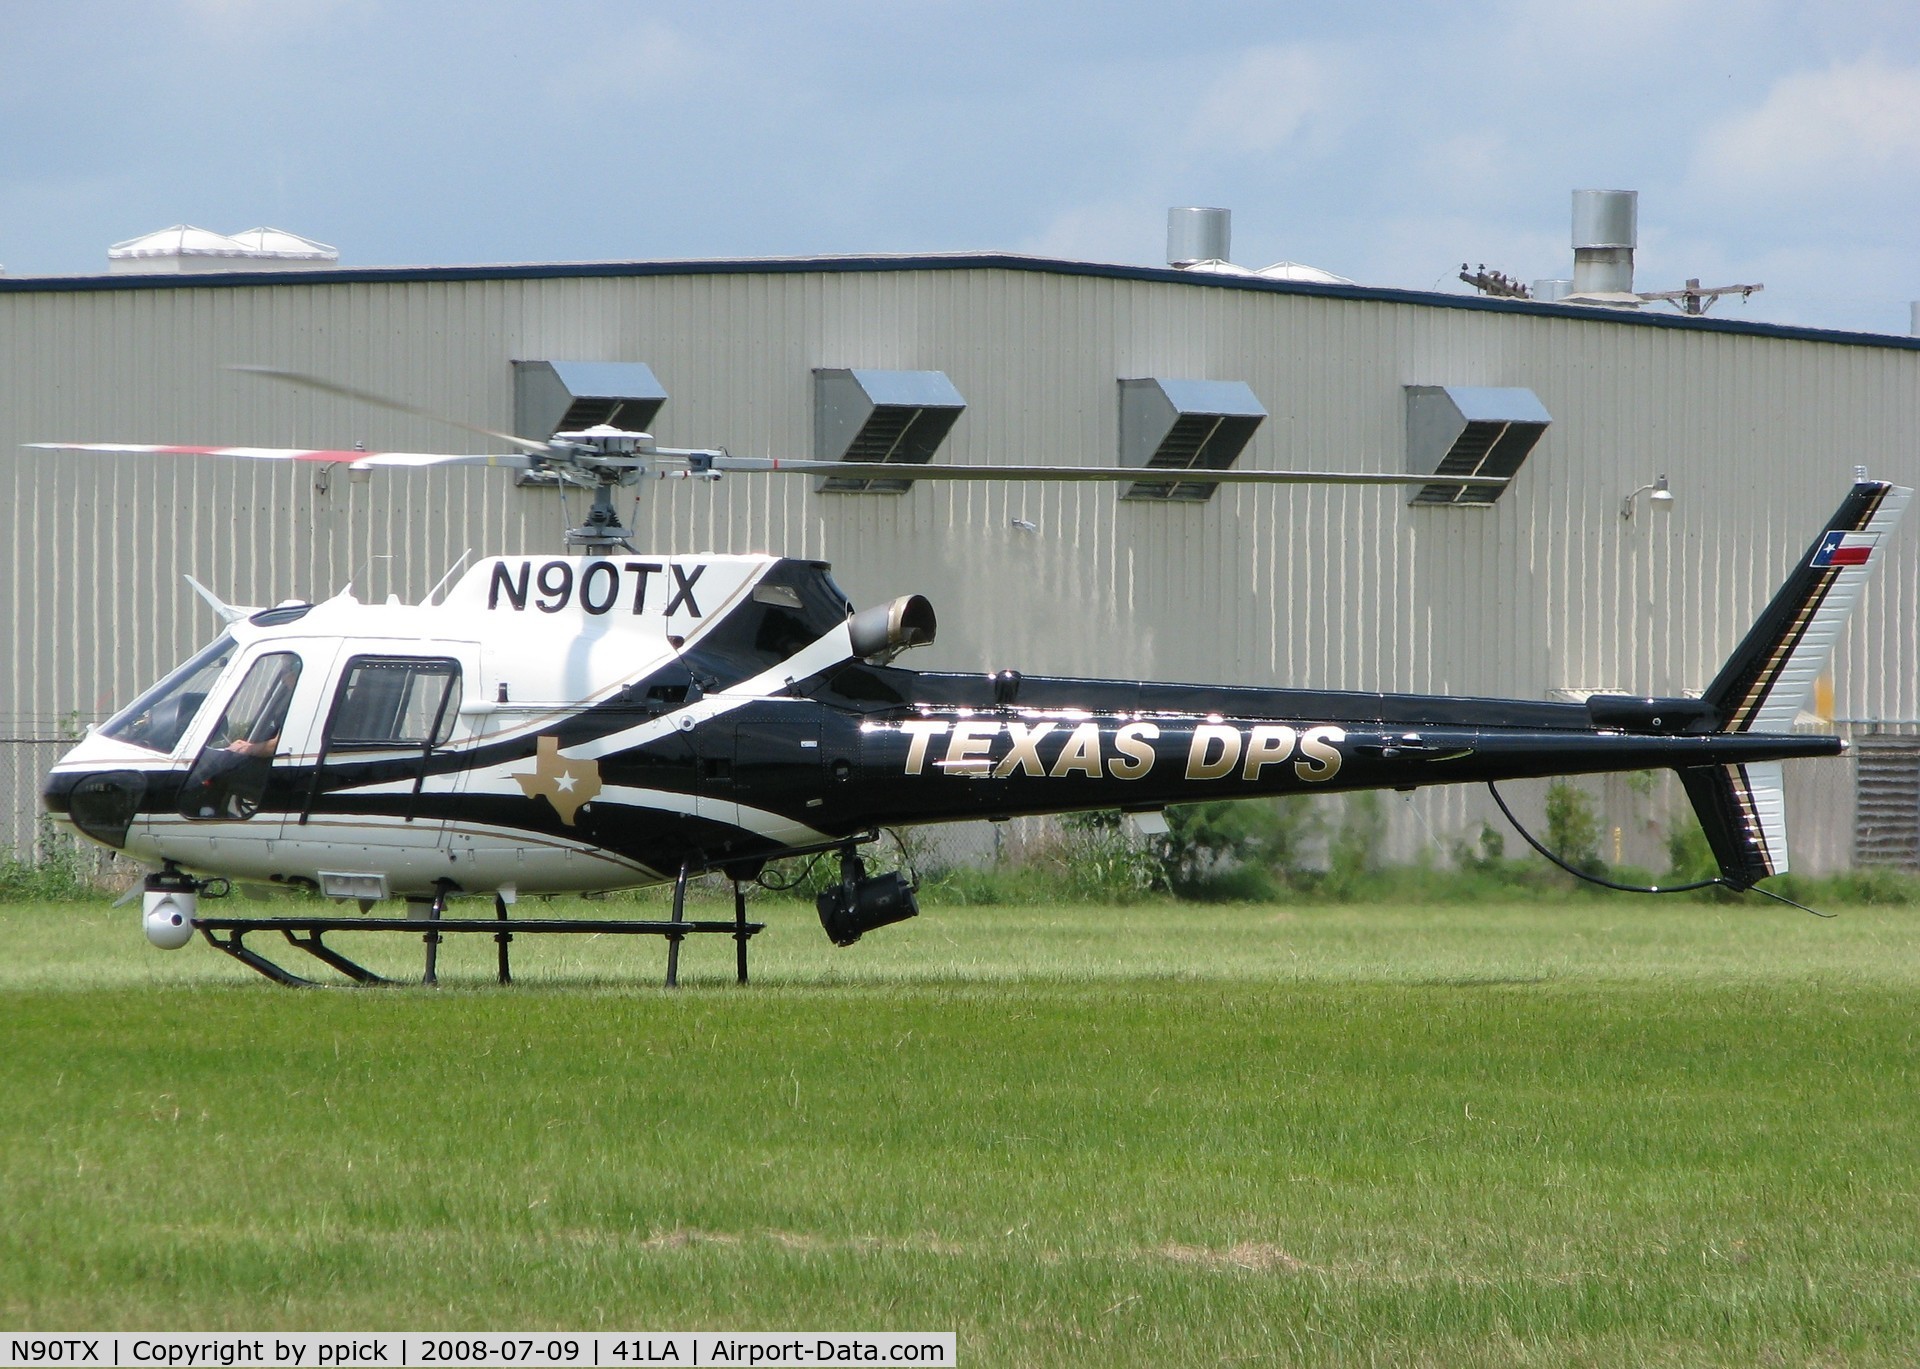 N90TX, 2008 Aerospatiale AS-350B-2 Ecureuil C/N 4401, Texas State Police at Metro Aviation near the Downtown Shreveport airport.